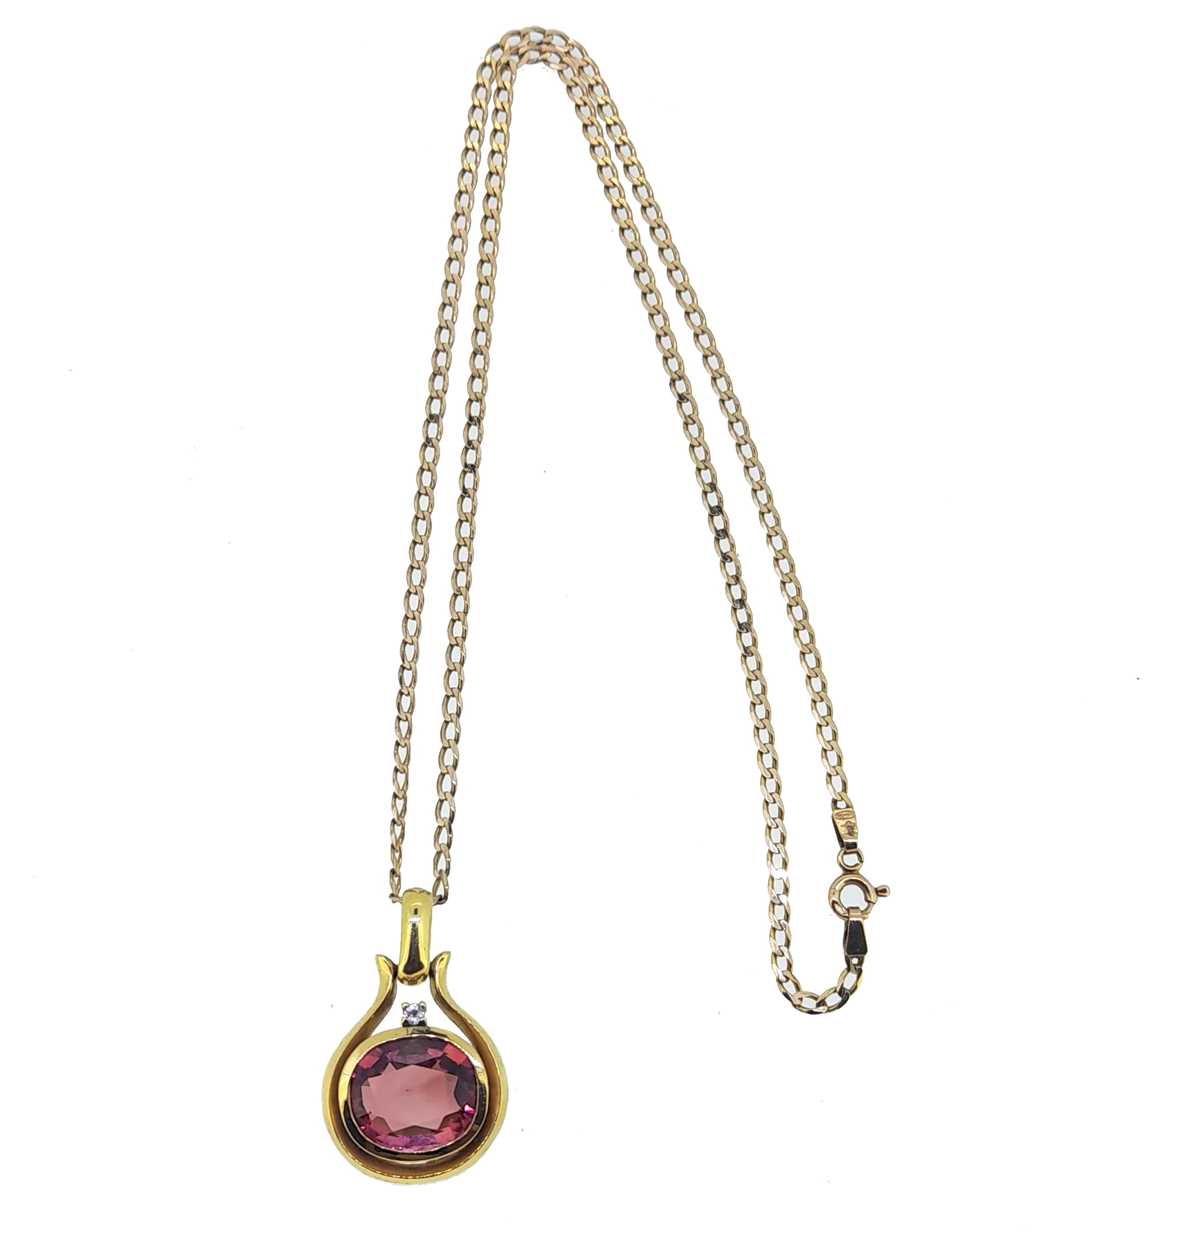 A pink tourmaline pendant and chain, - Image 2 of 3